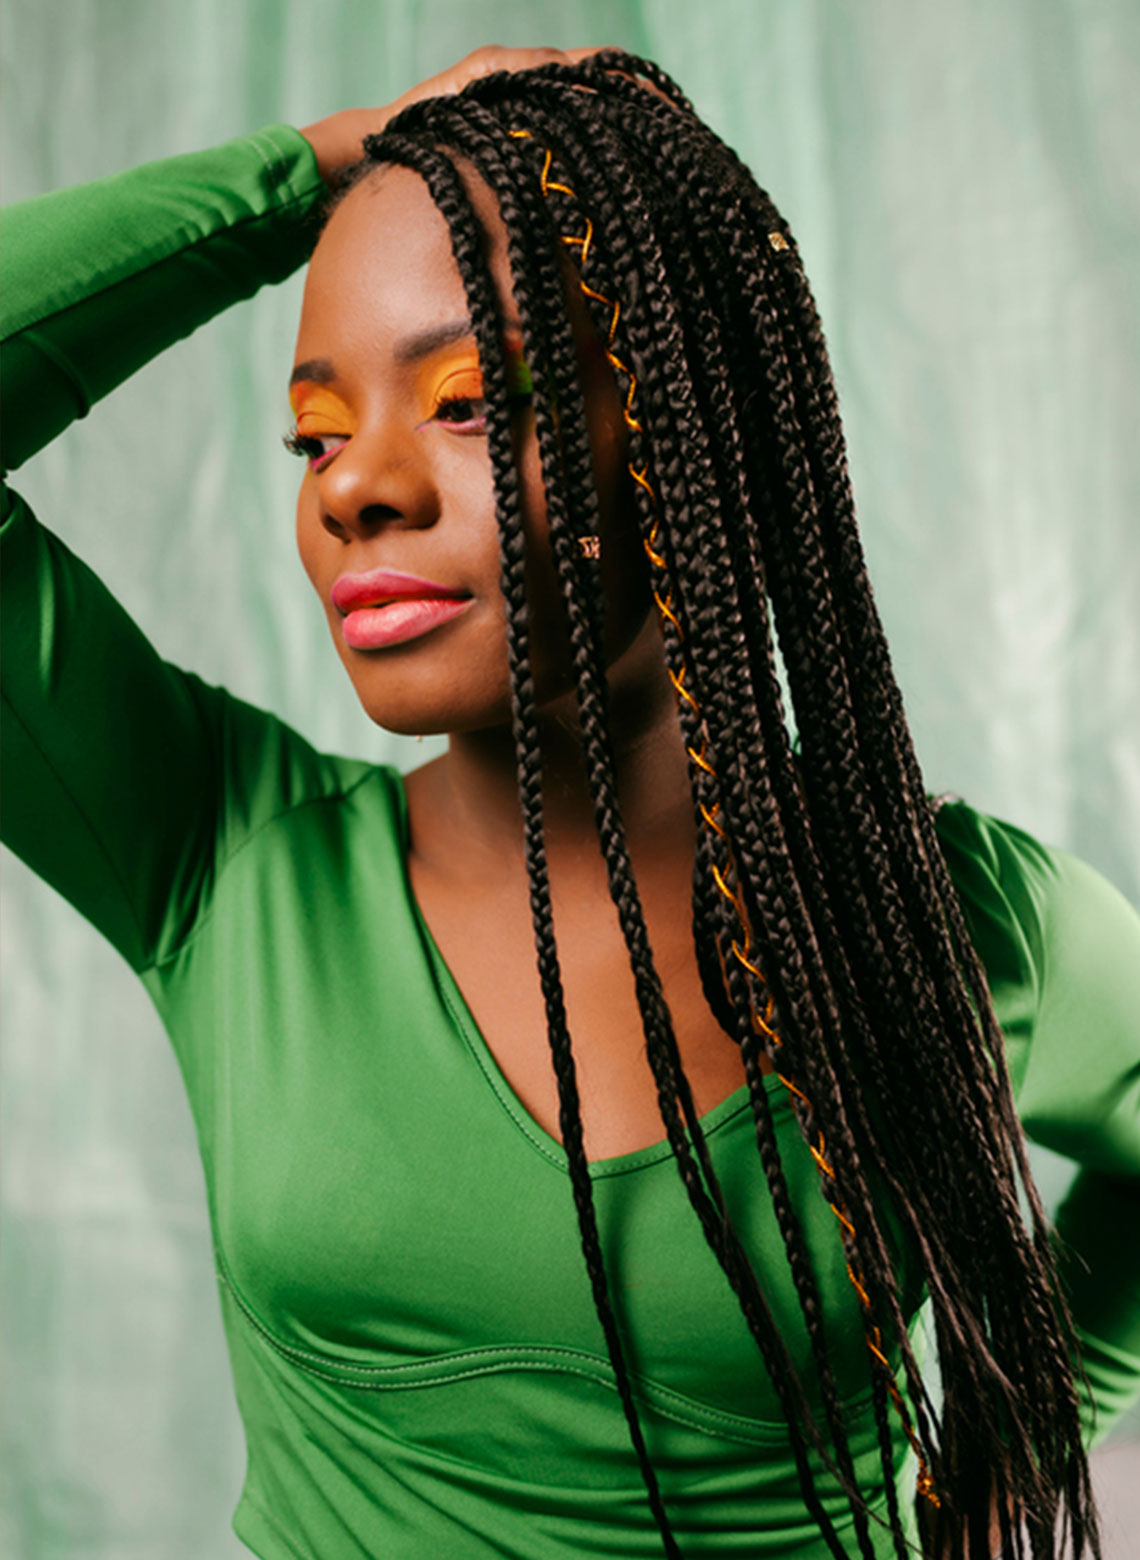 person wearing green top, orange eyeshadow, pink lipstick and accessorized box braids while looking down the side with one hand on the back of their head